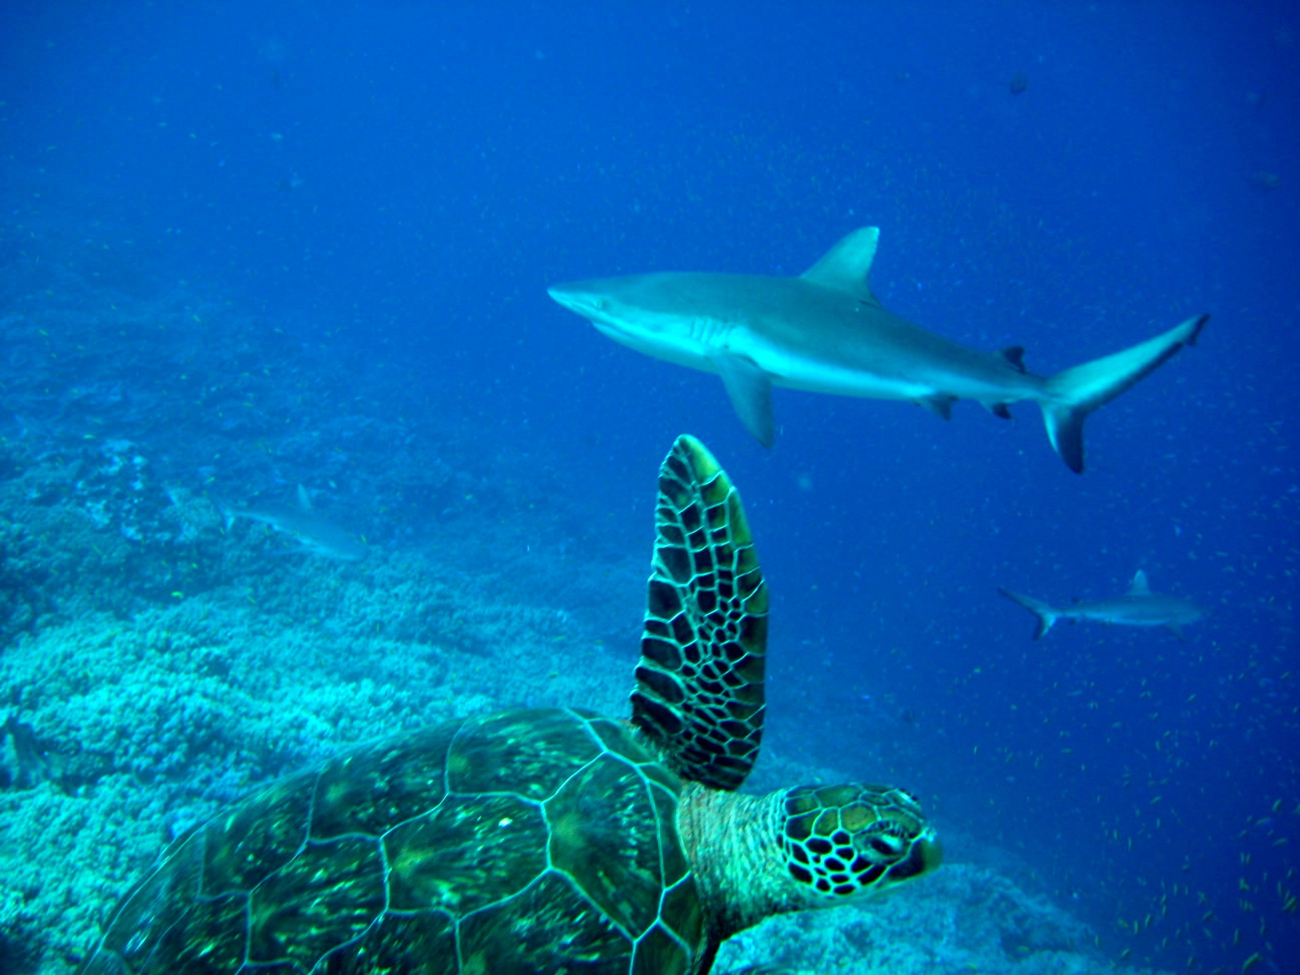 Green sea turtle doing a fly-by while sharks cruise in the background